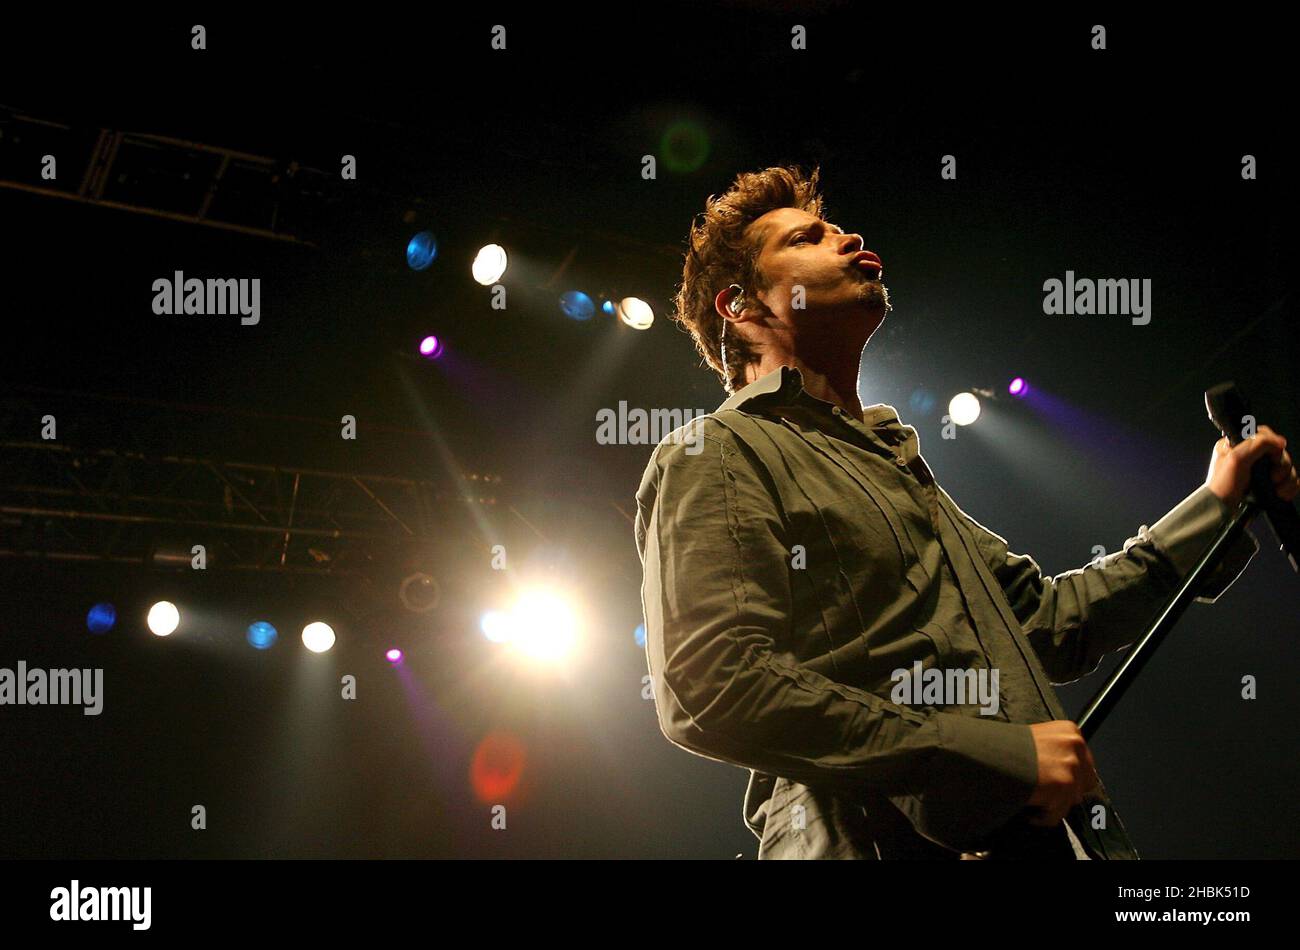 Chris Cornell live in concert at the Astoria in London on May 16, 2007. Stock Photo